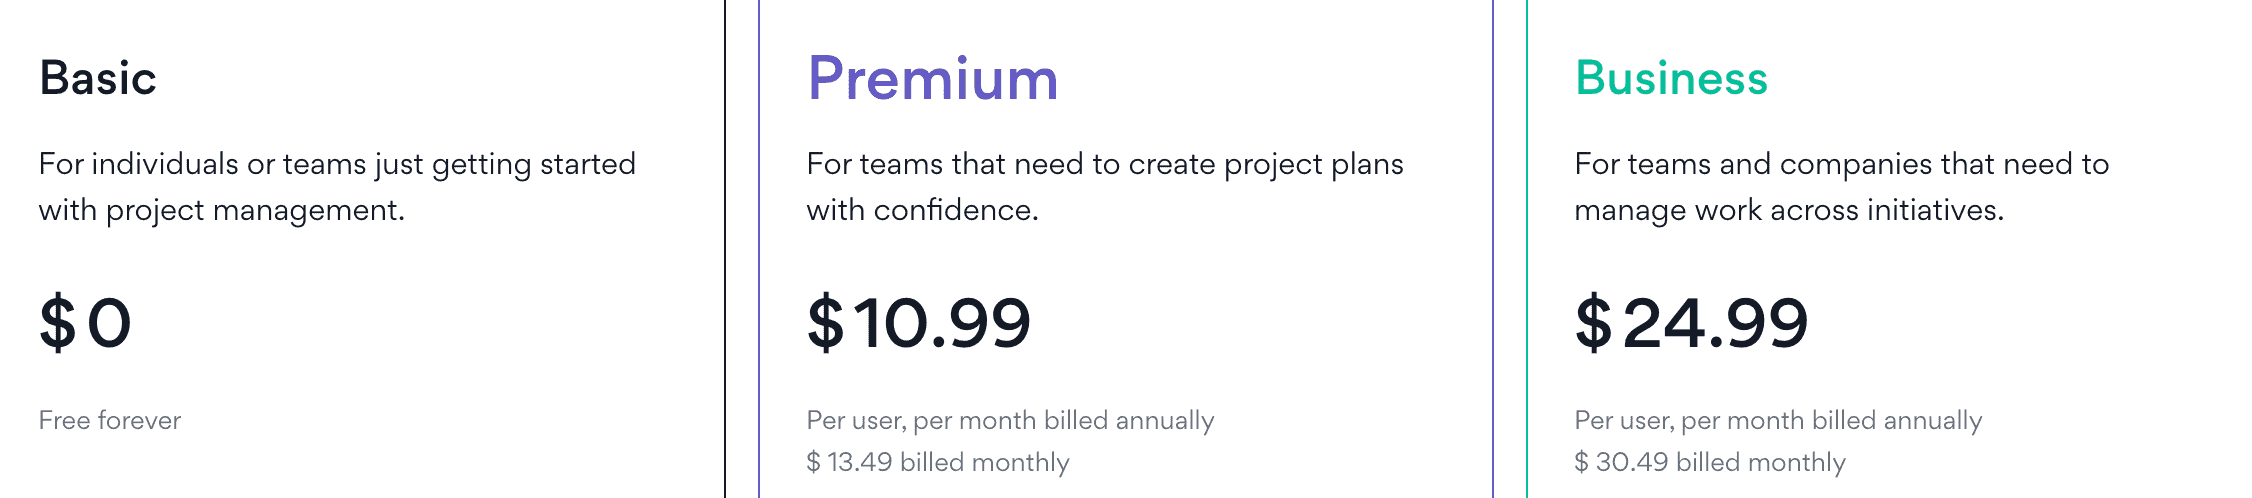 Asana pricing broken down by pricing plans